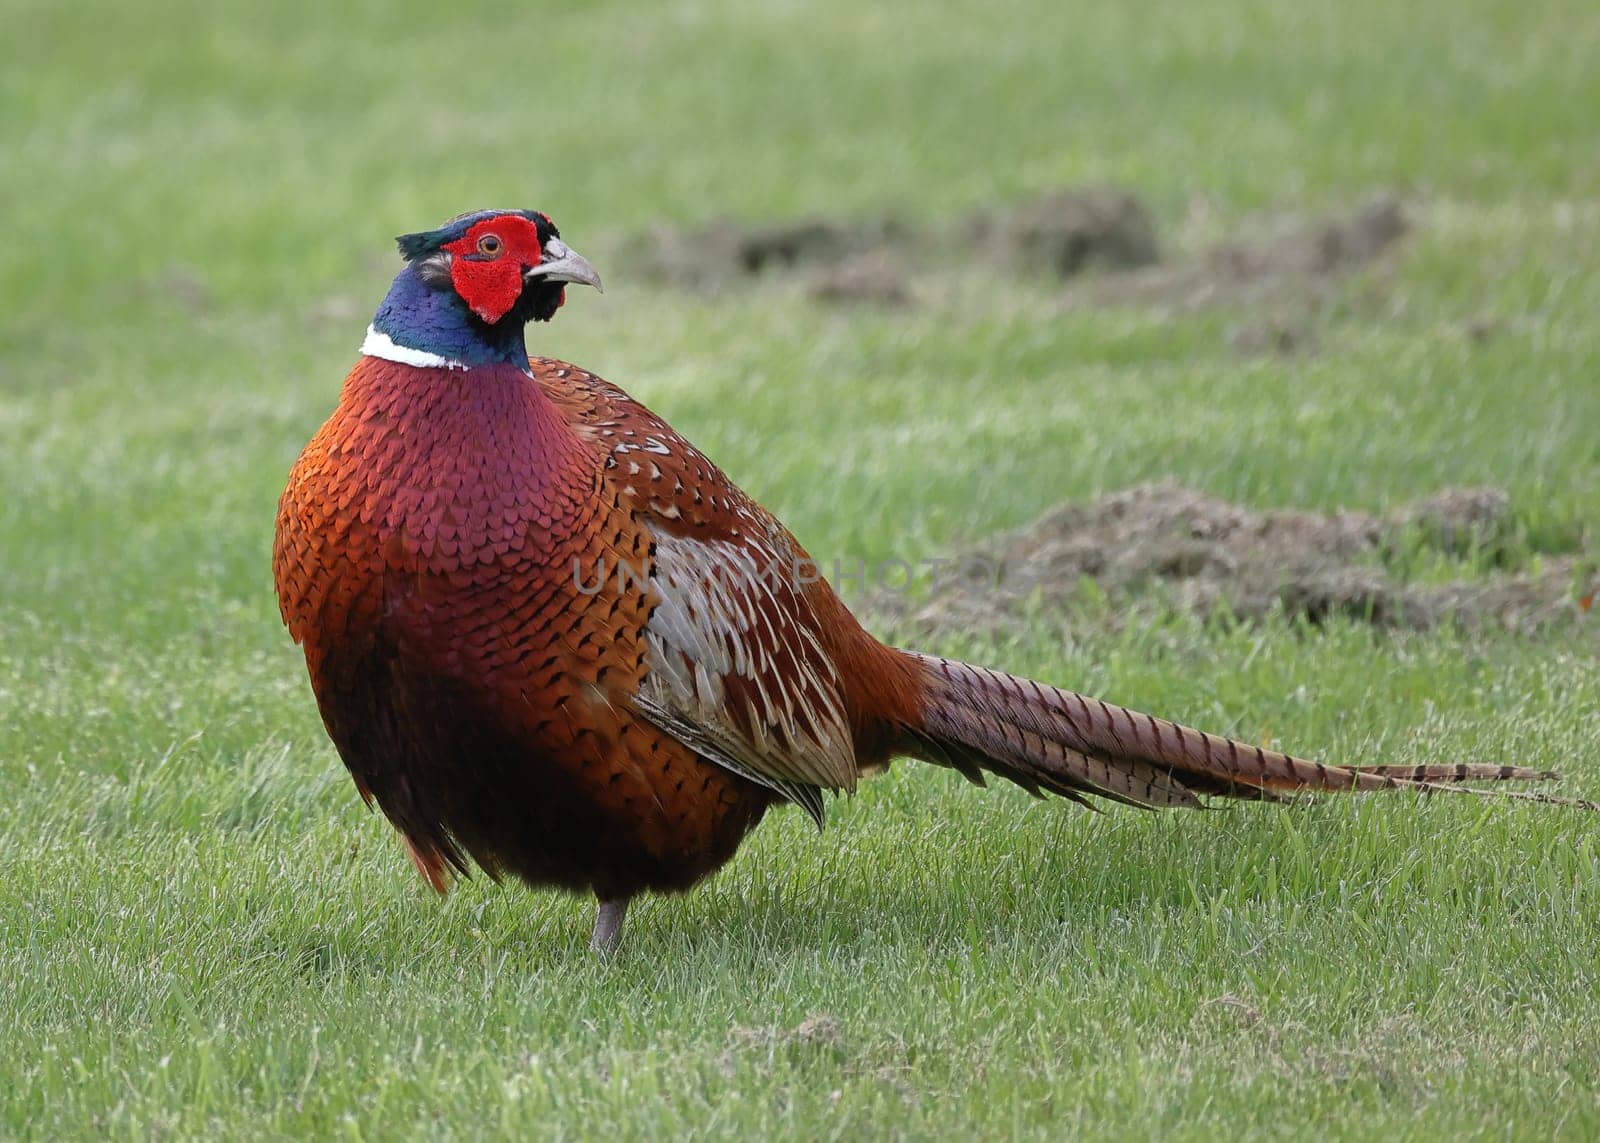 A close up image of an adult male pheasant in Northern England.